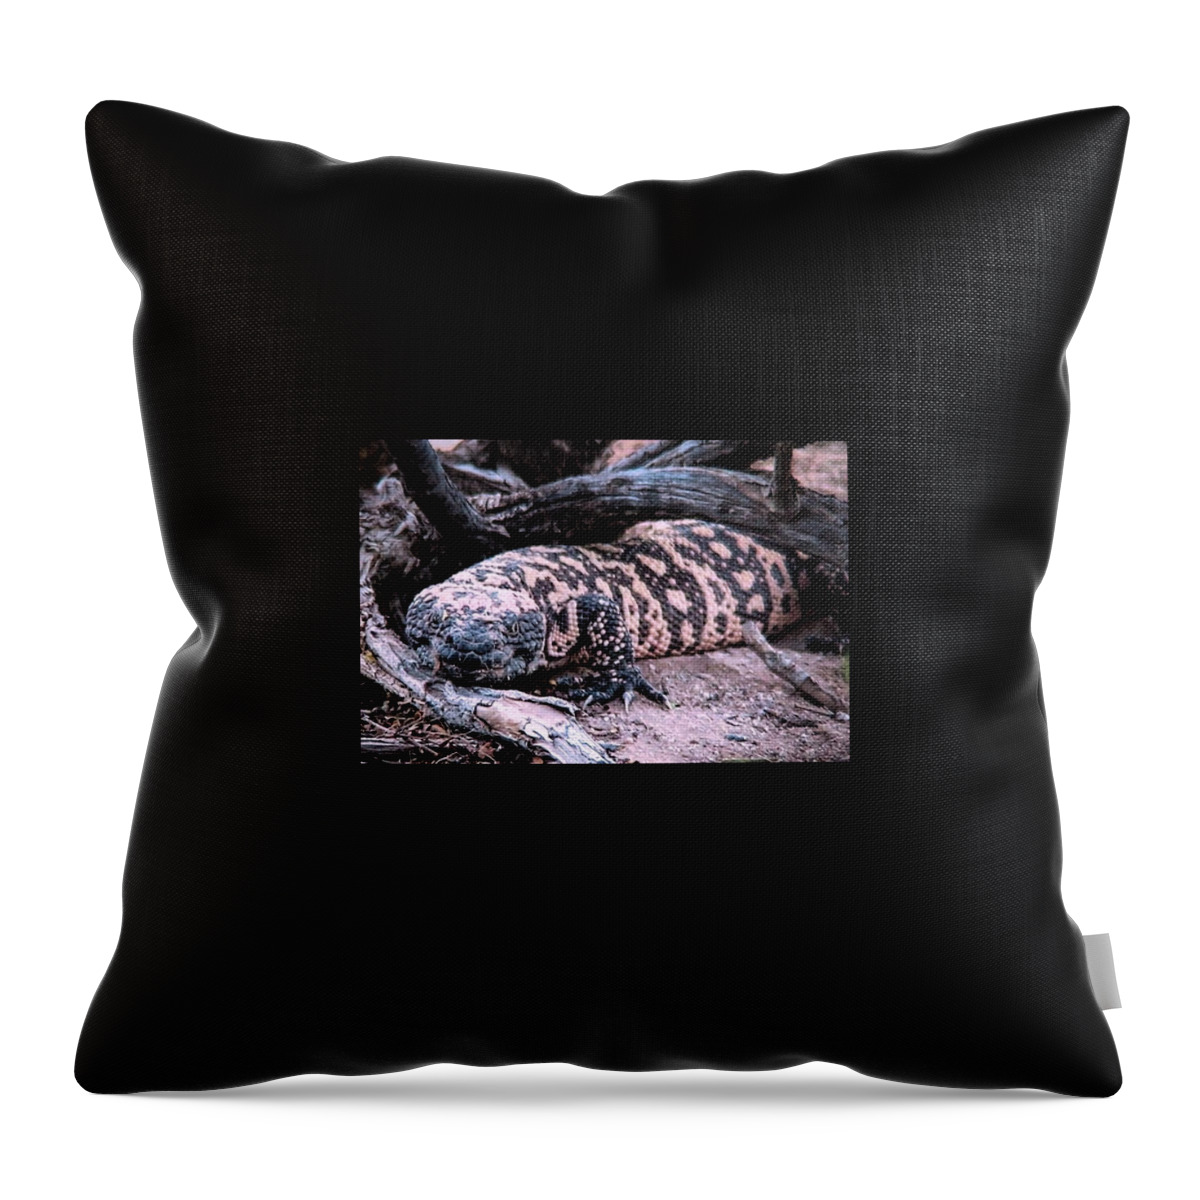 Animals Throw Pillow featuring the photograph Gila Monster Under Creosote Bush by Judy Kennedy